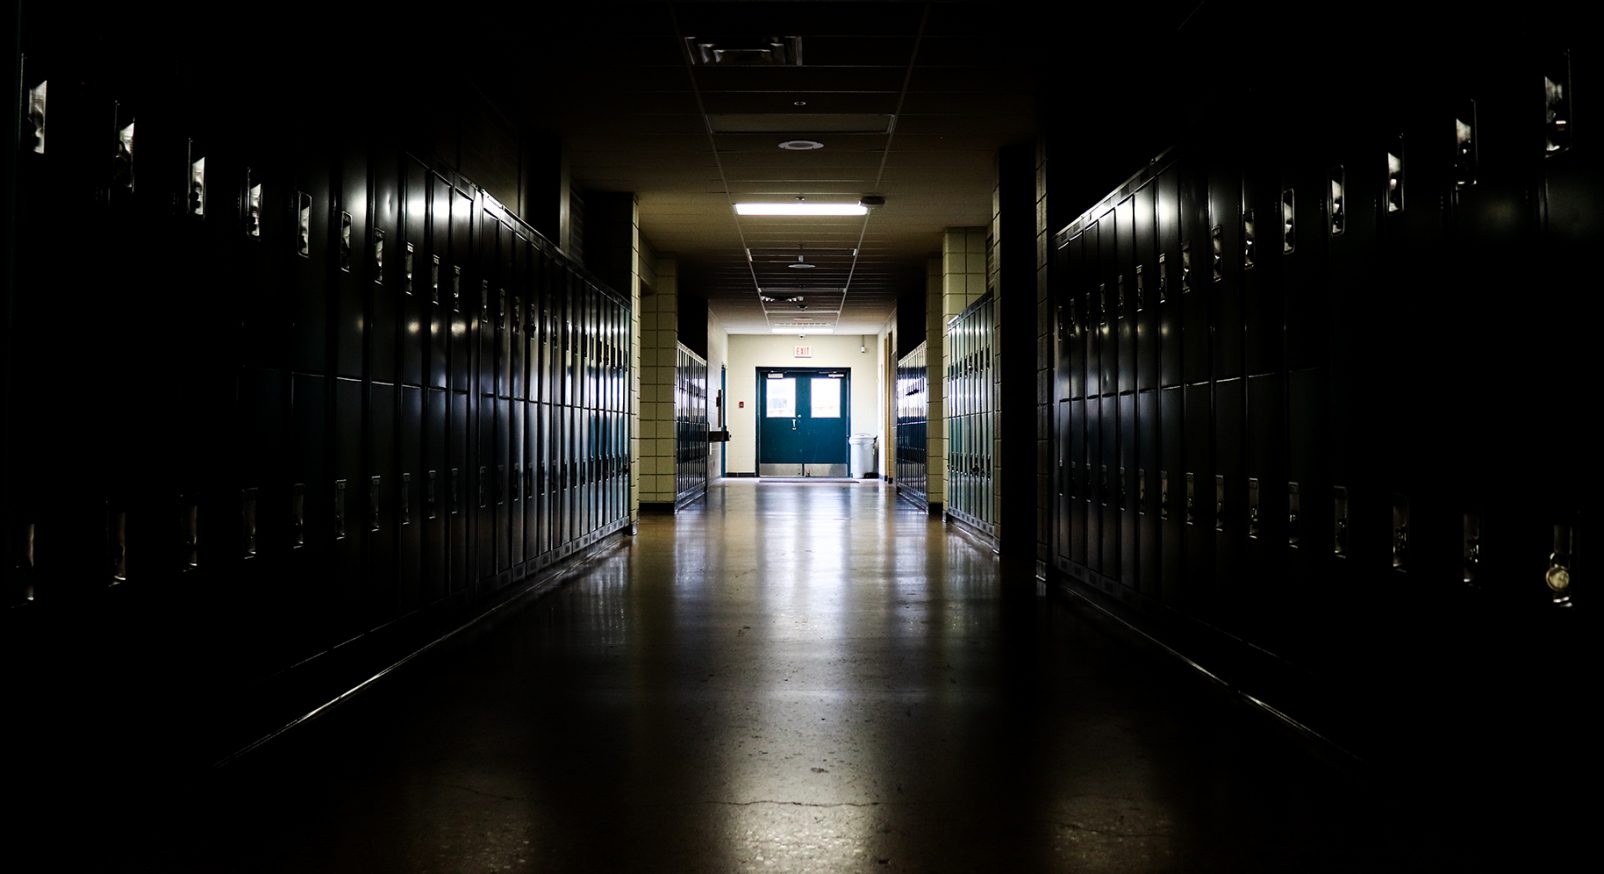 School,Hallway,With,Deep,Shadows,Sinking,Into,The,Various,Rows